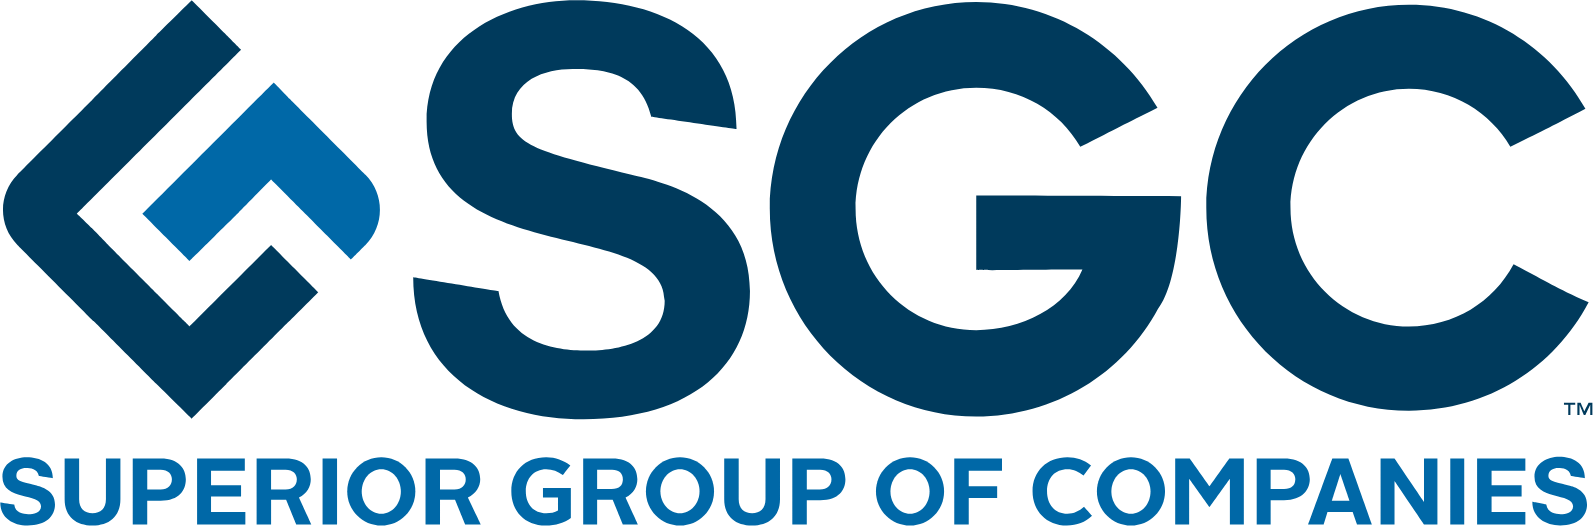 Superior Group of Companies logo large (transparent PNG)